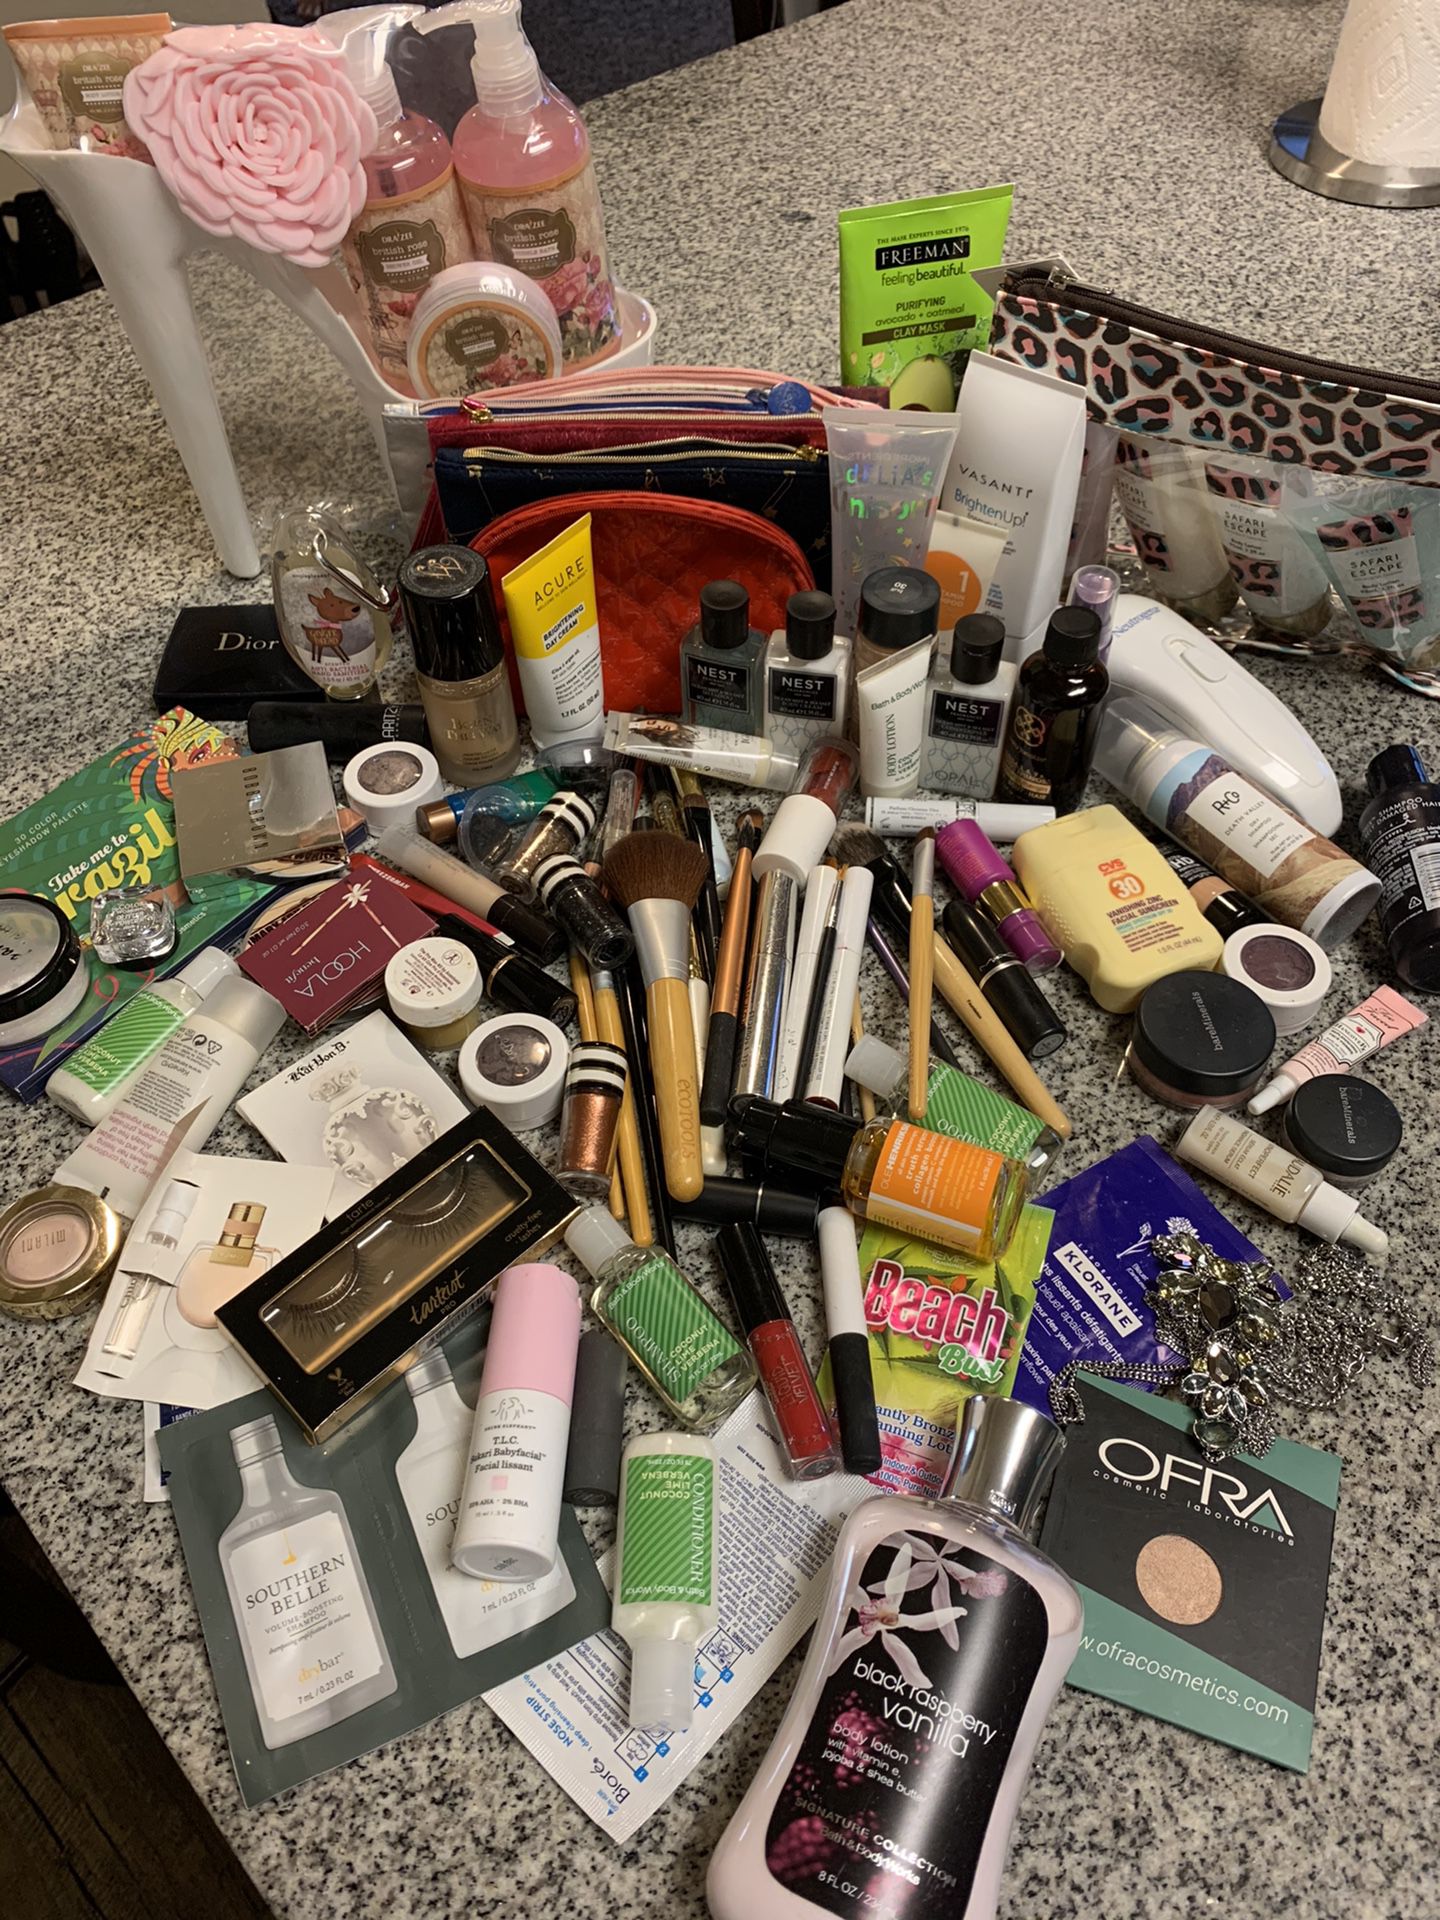 Makeup lipsticks brushes eye shadows perfume skincare and other beauty products